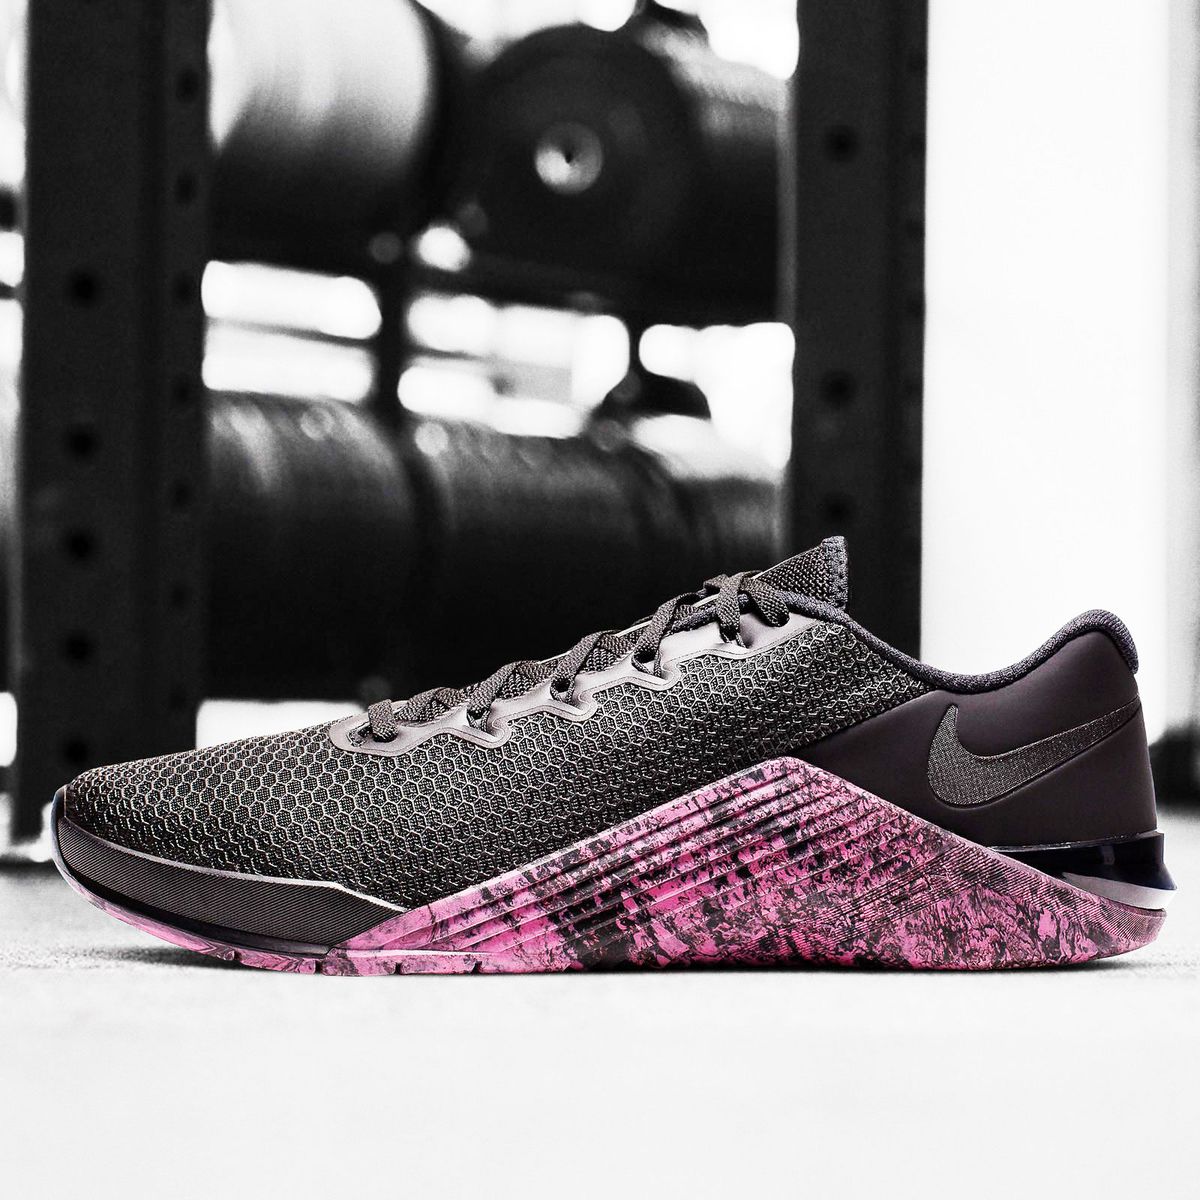 freno A fondo gusto Nike Metcon 5 Shoes for CrossFit Review